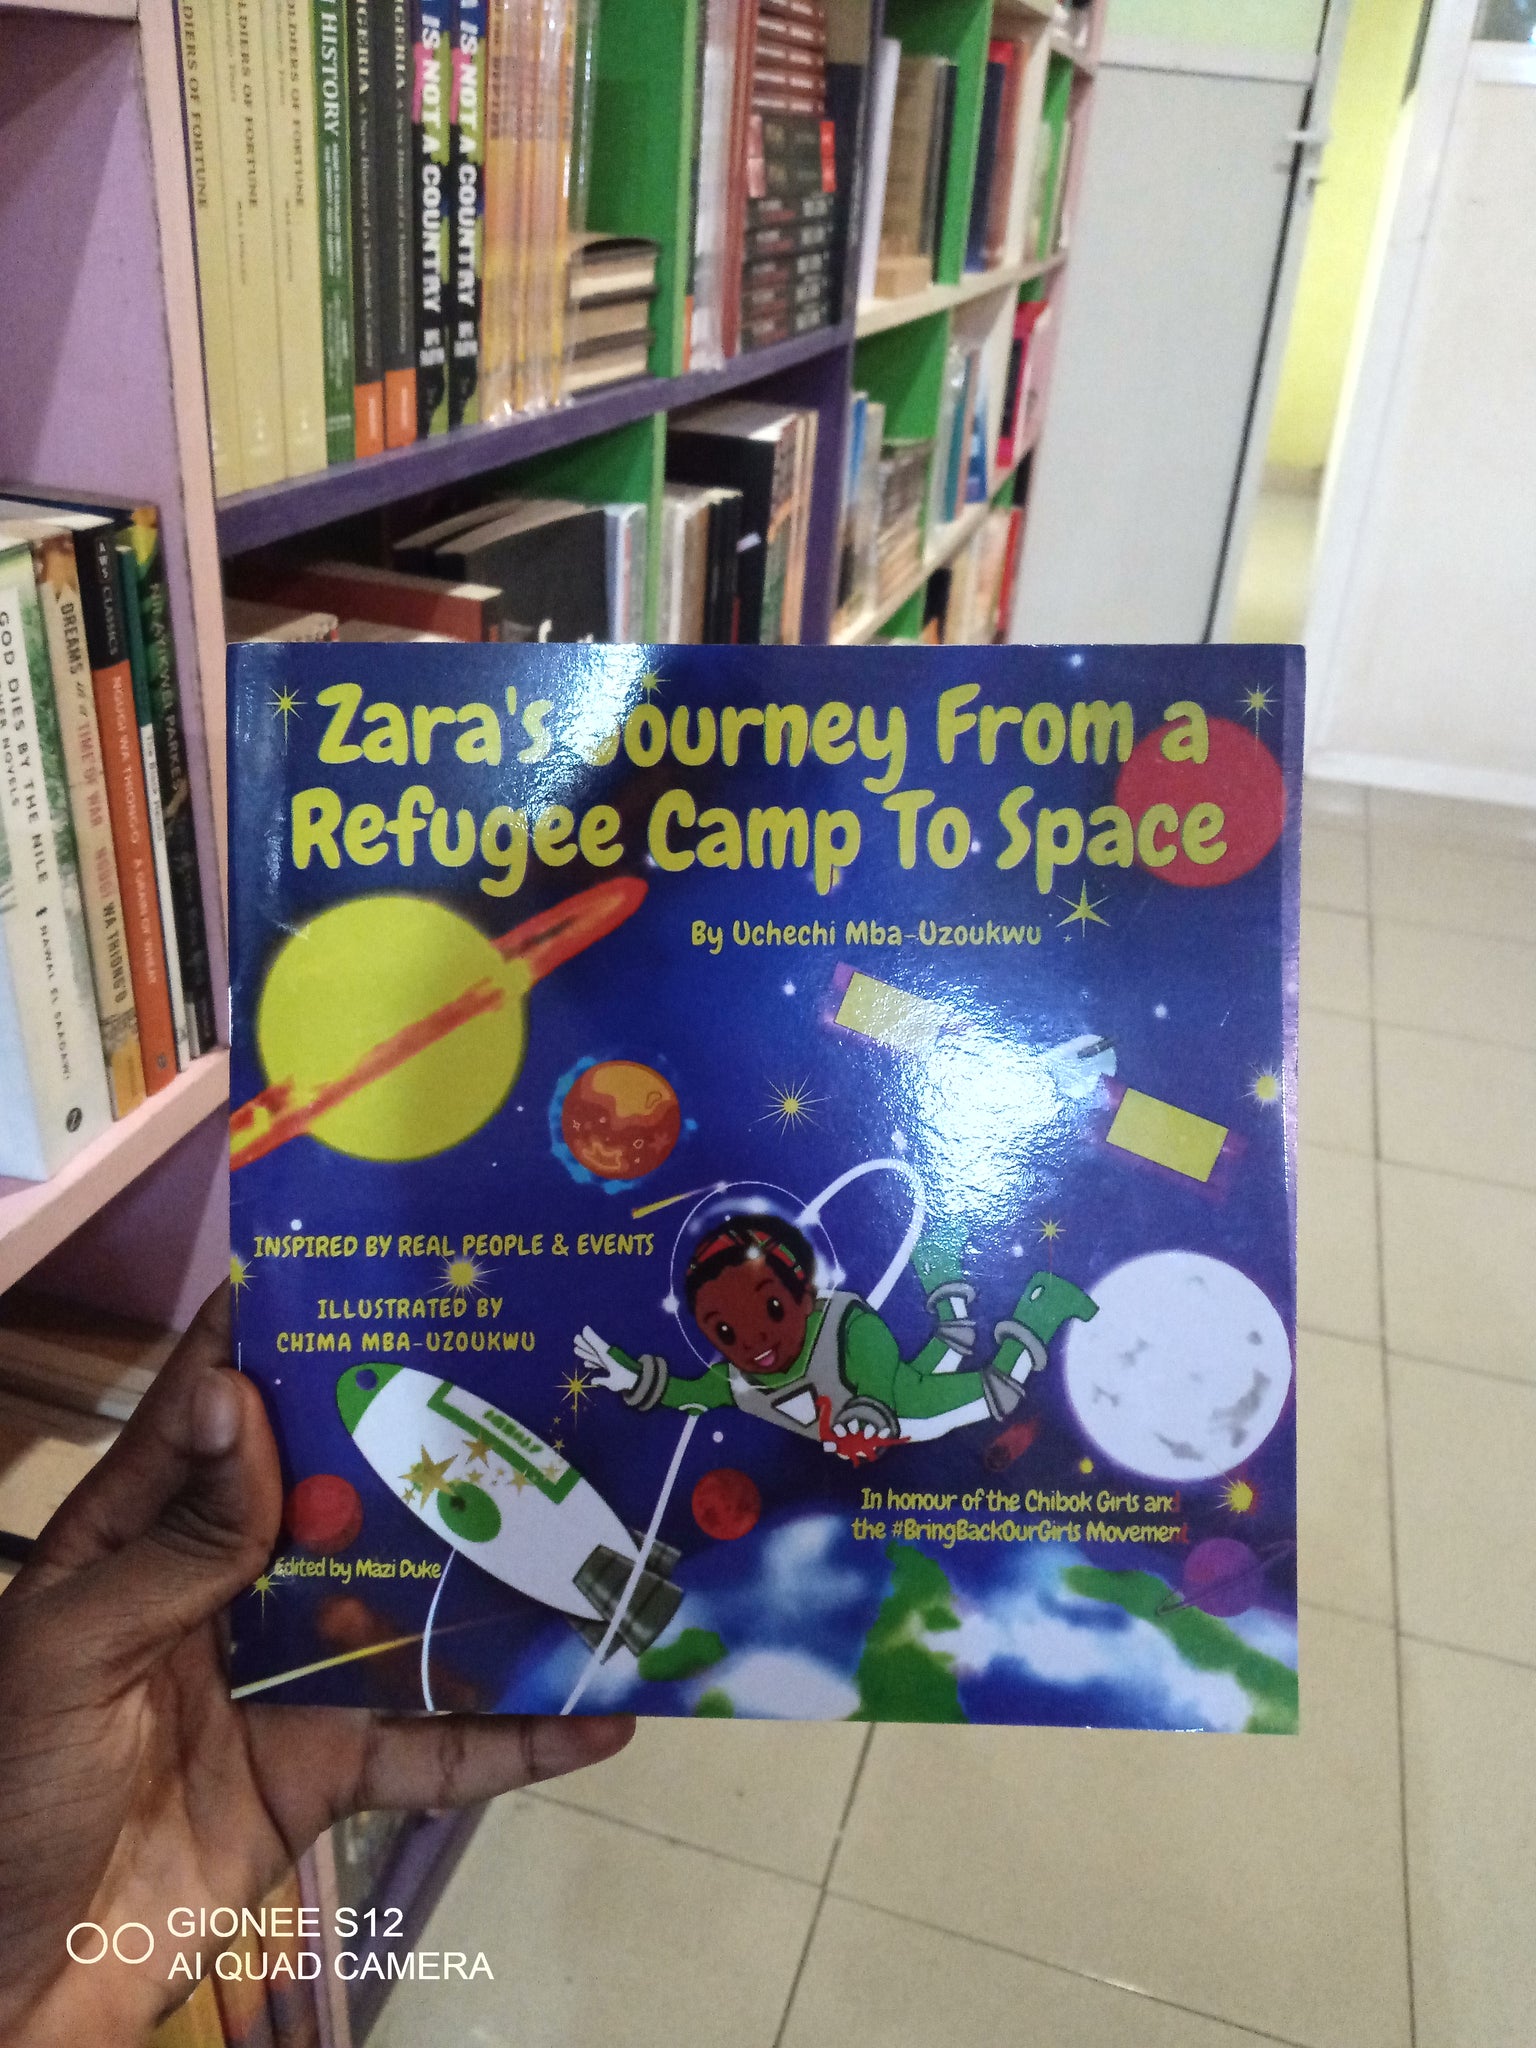 Zara's Journey from a Refugee camp to space